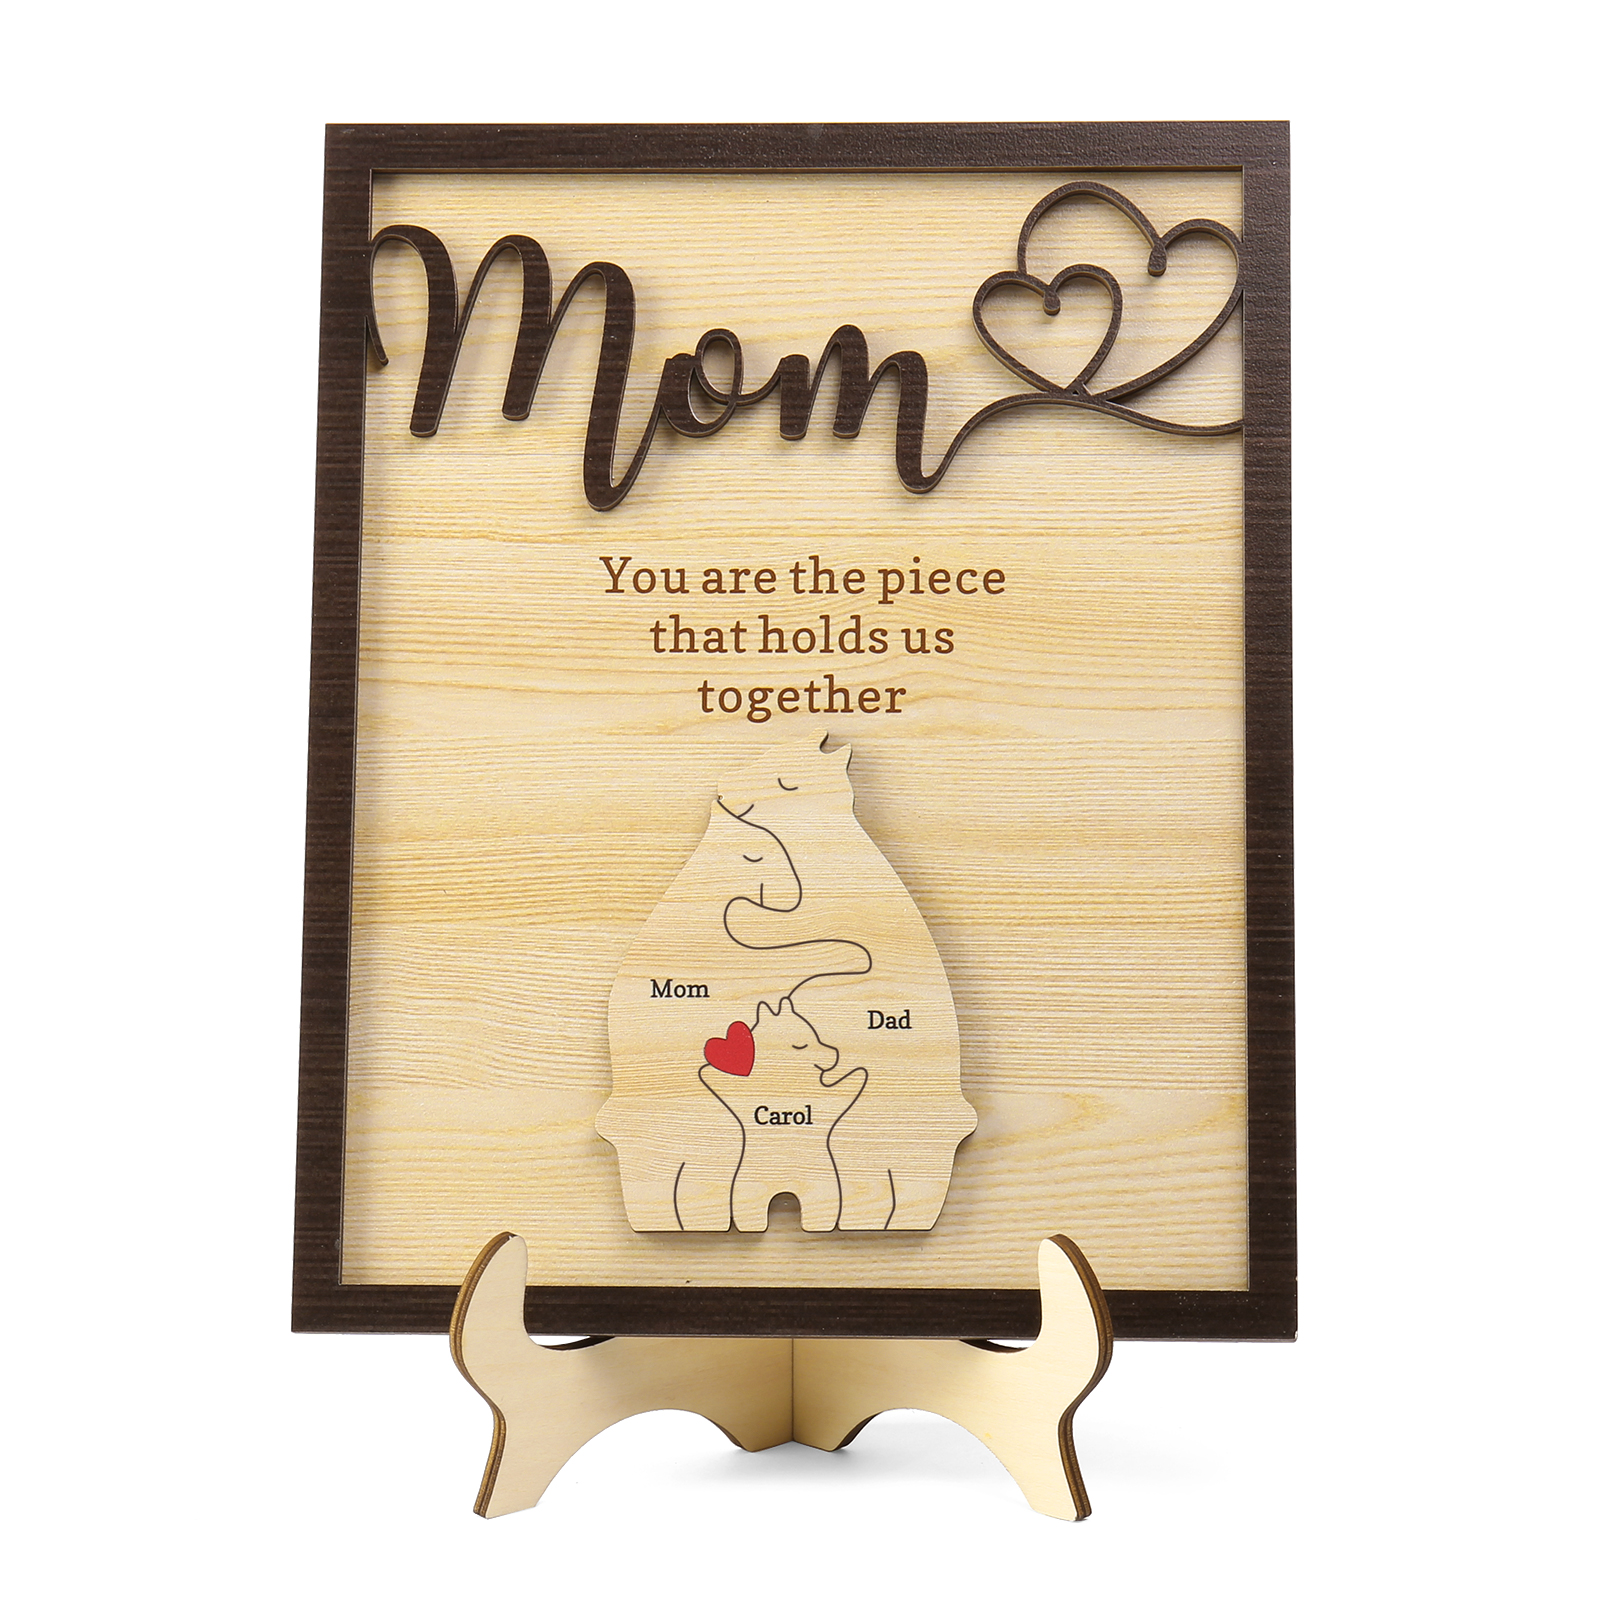 3 Names - Personalized Home Frame Wooden Ornaments Cute Bear Style Ornaments for Mom